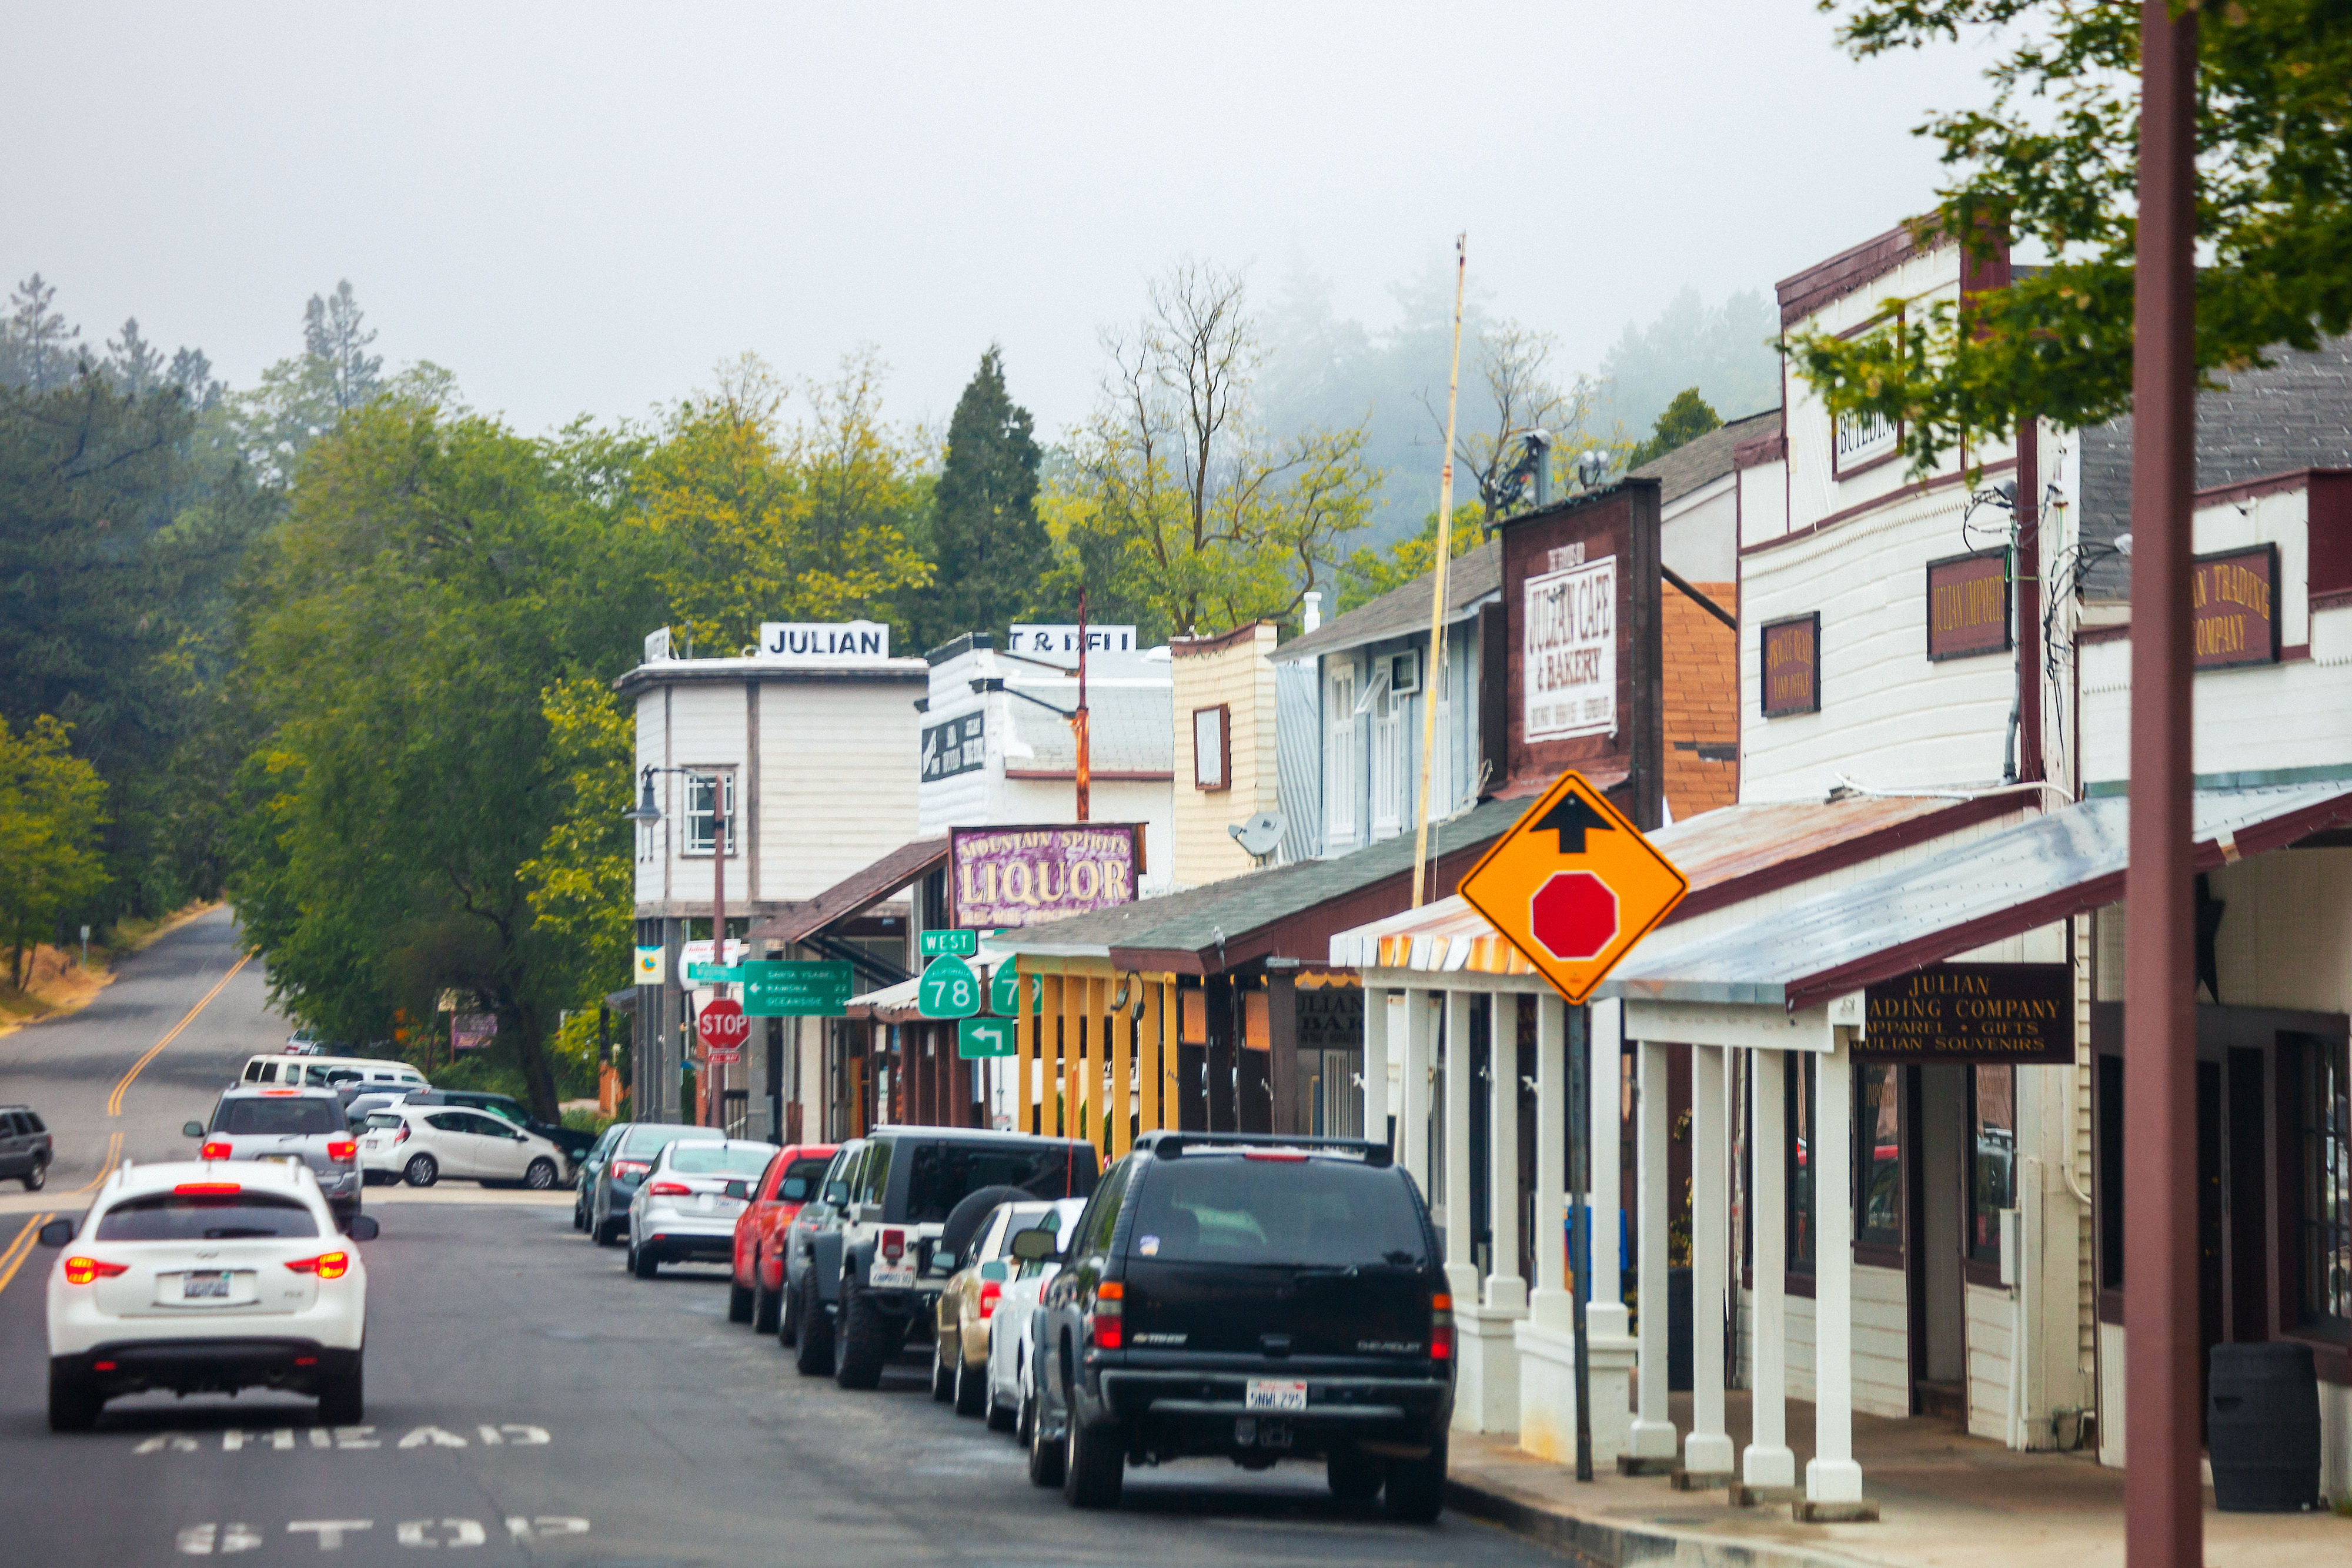 Quaint street of Julian, California with shops, signage, parked cars, and a mountain backdrop